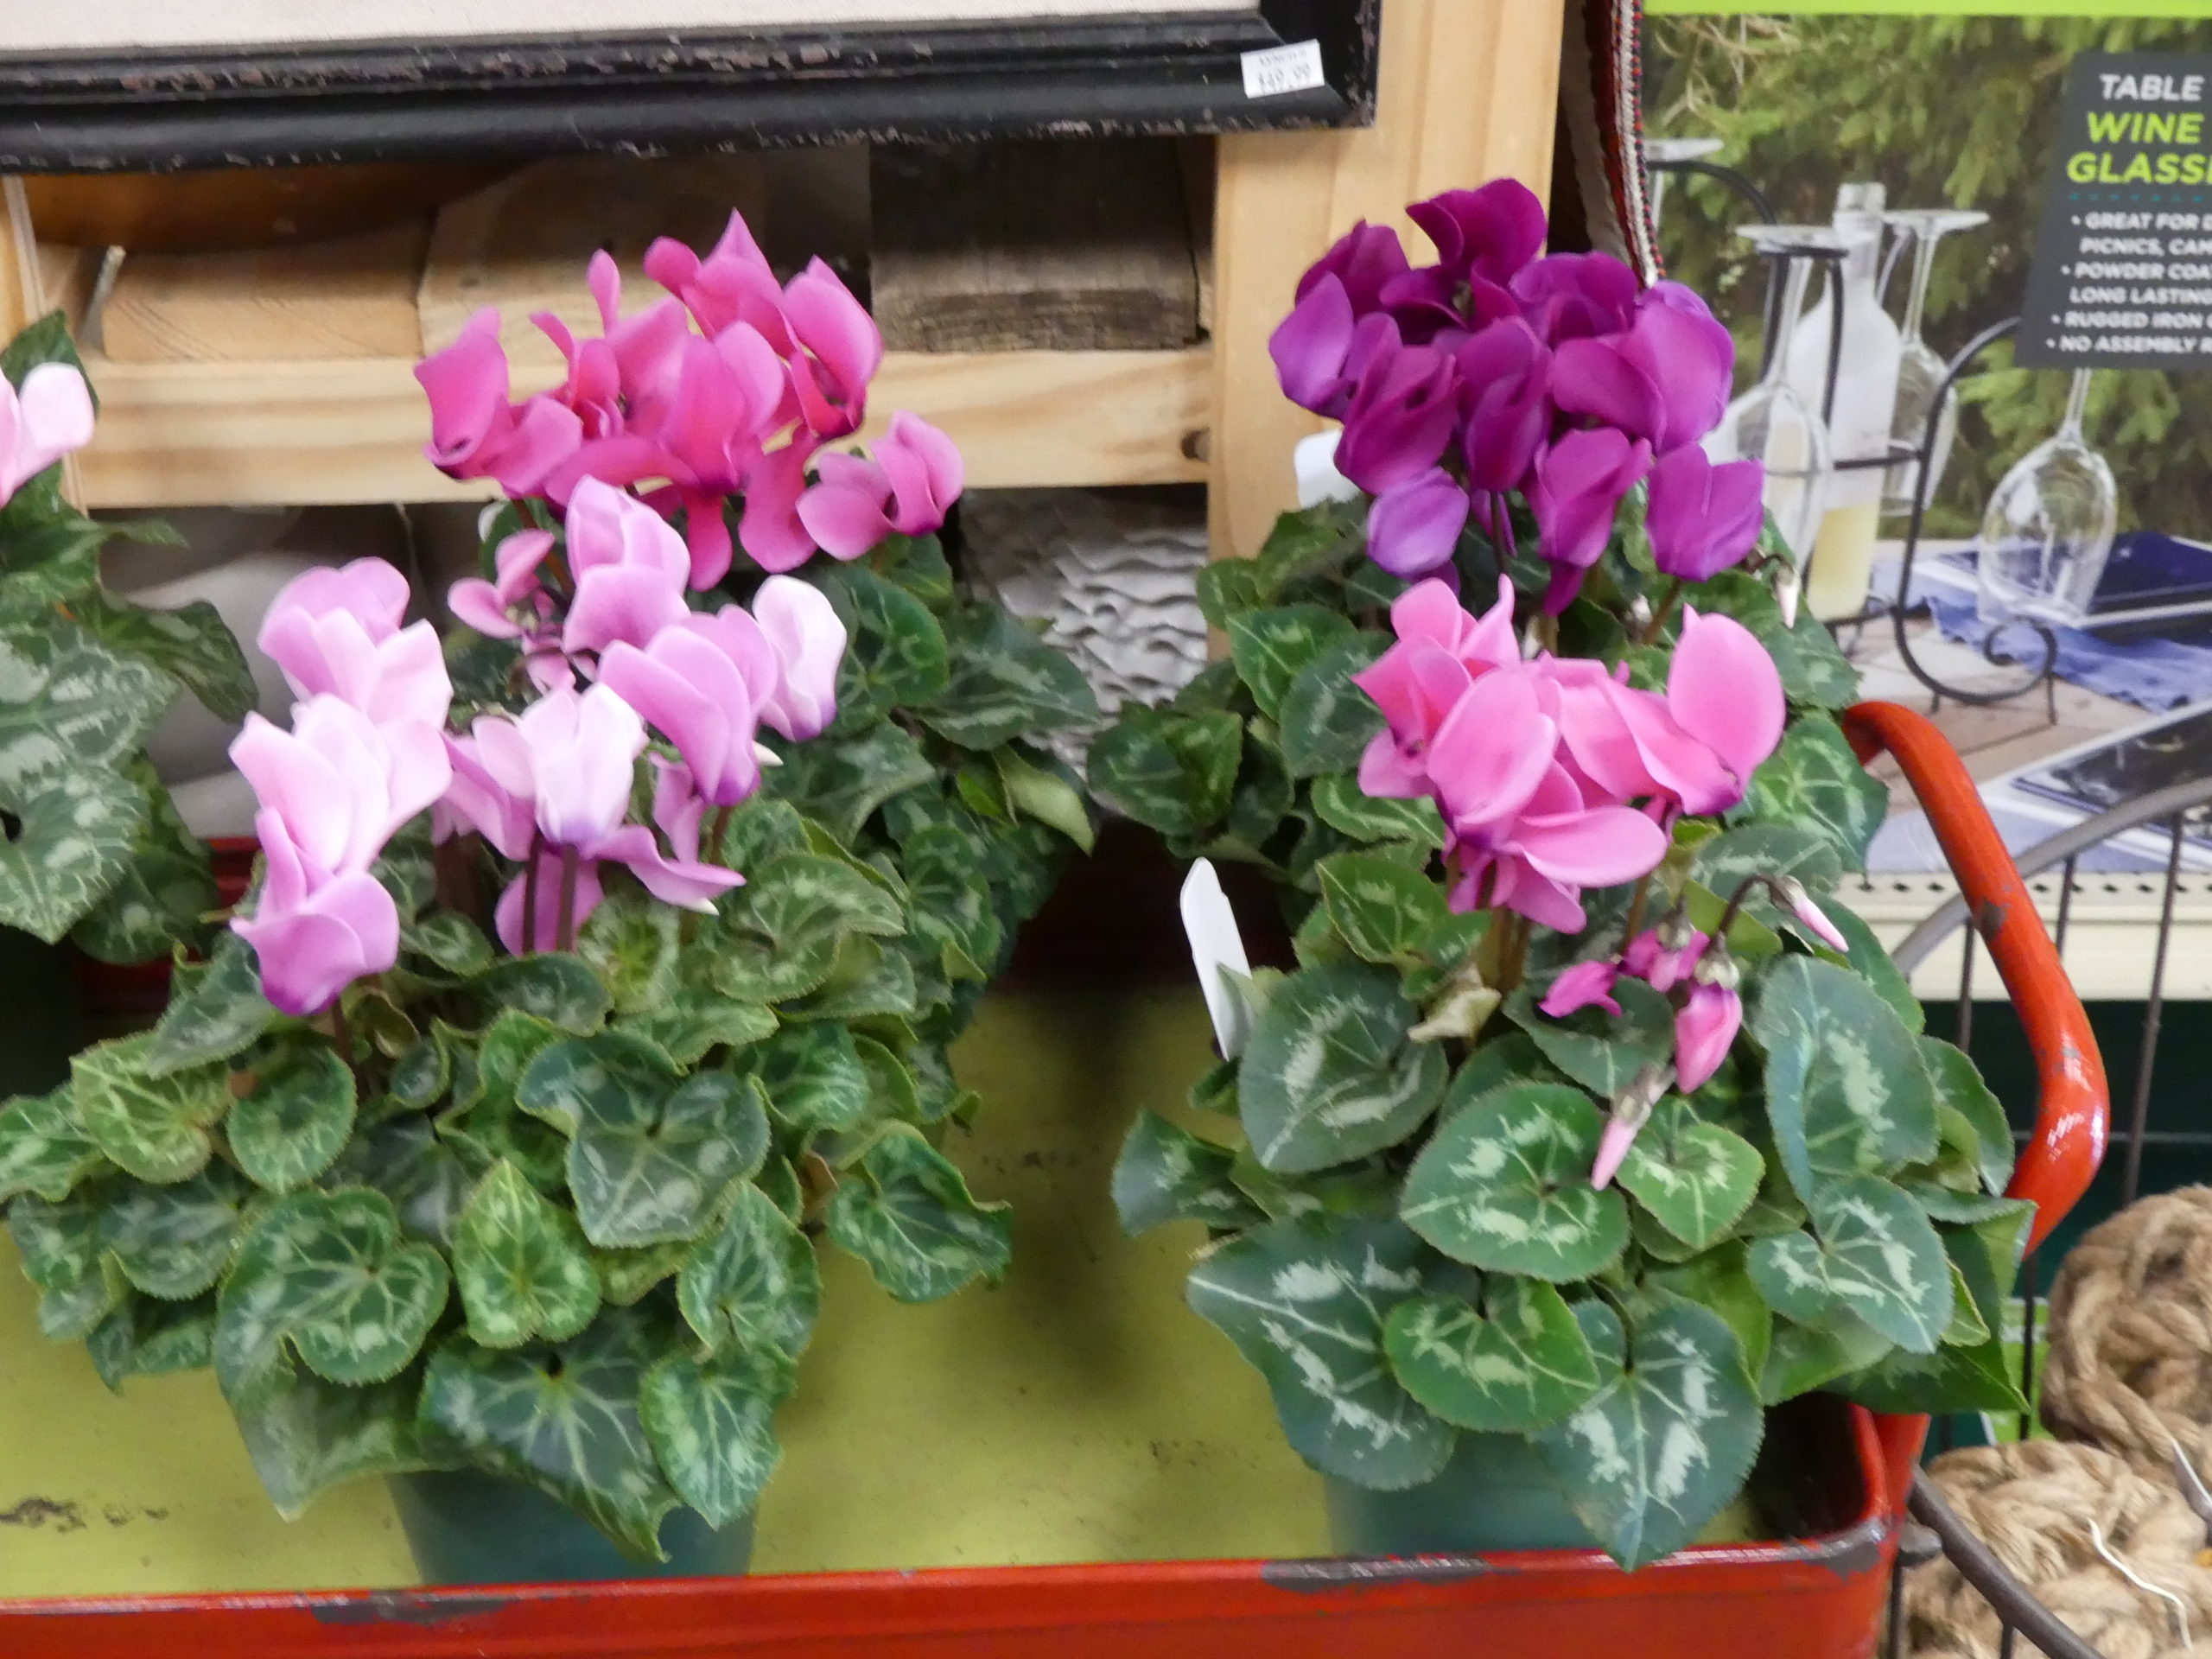 Florist-type Cyclamen are available now at garden centers and many supermarkets. They were recently found in pot sizes from 2 up to 8 inches. When kept cool, they’ll thrive indoors through late winter. ANDREW MESSINGER